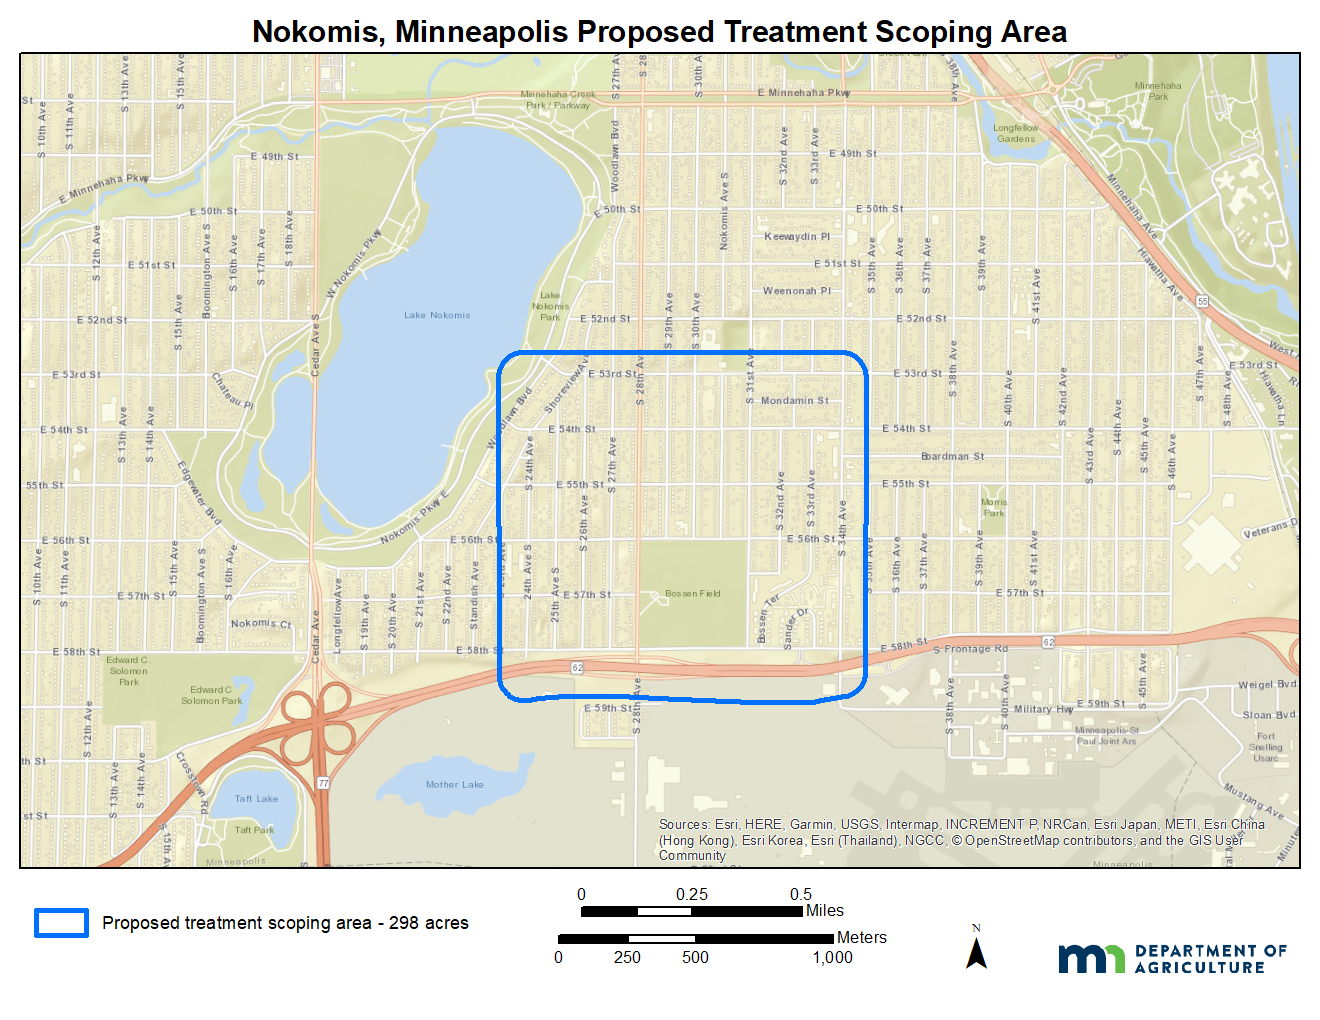 Map of the proposed gypsy moth treatment area that is roughly bordered by E 53rd Street on the north, Highway 62 on the south, 23rd Avenue S on the west, and 35th Avenue S on the east